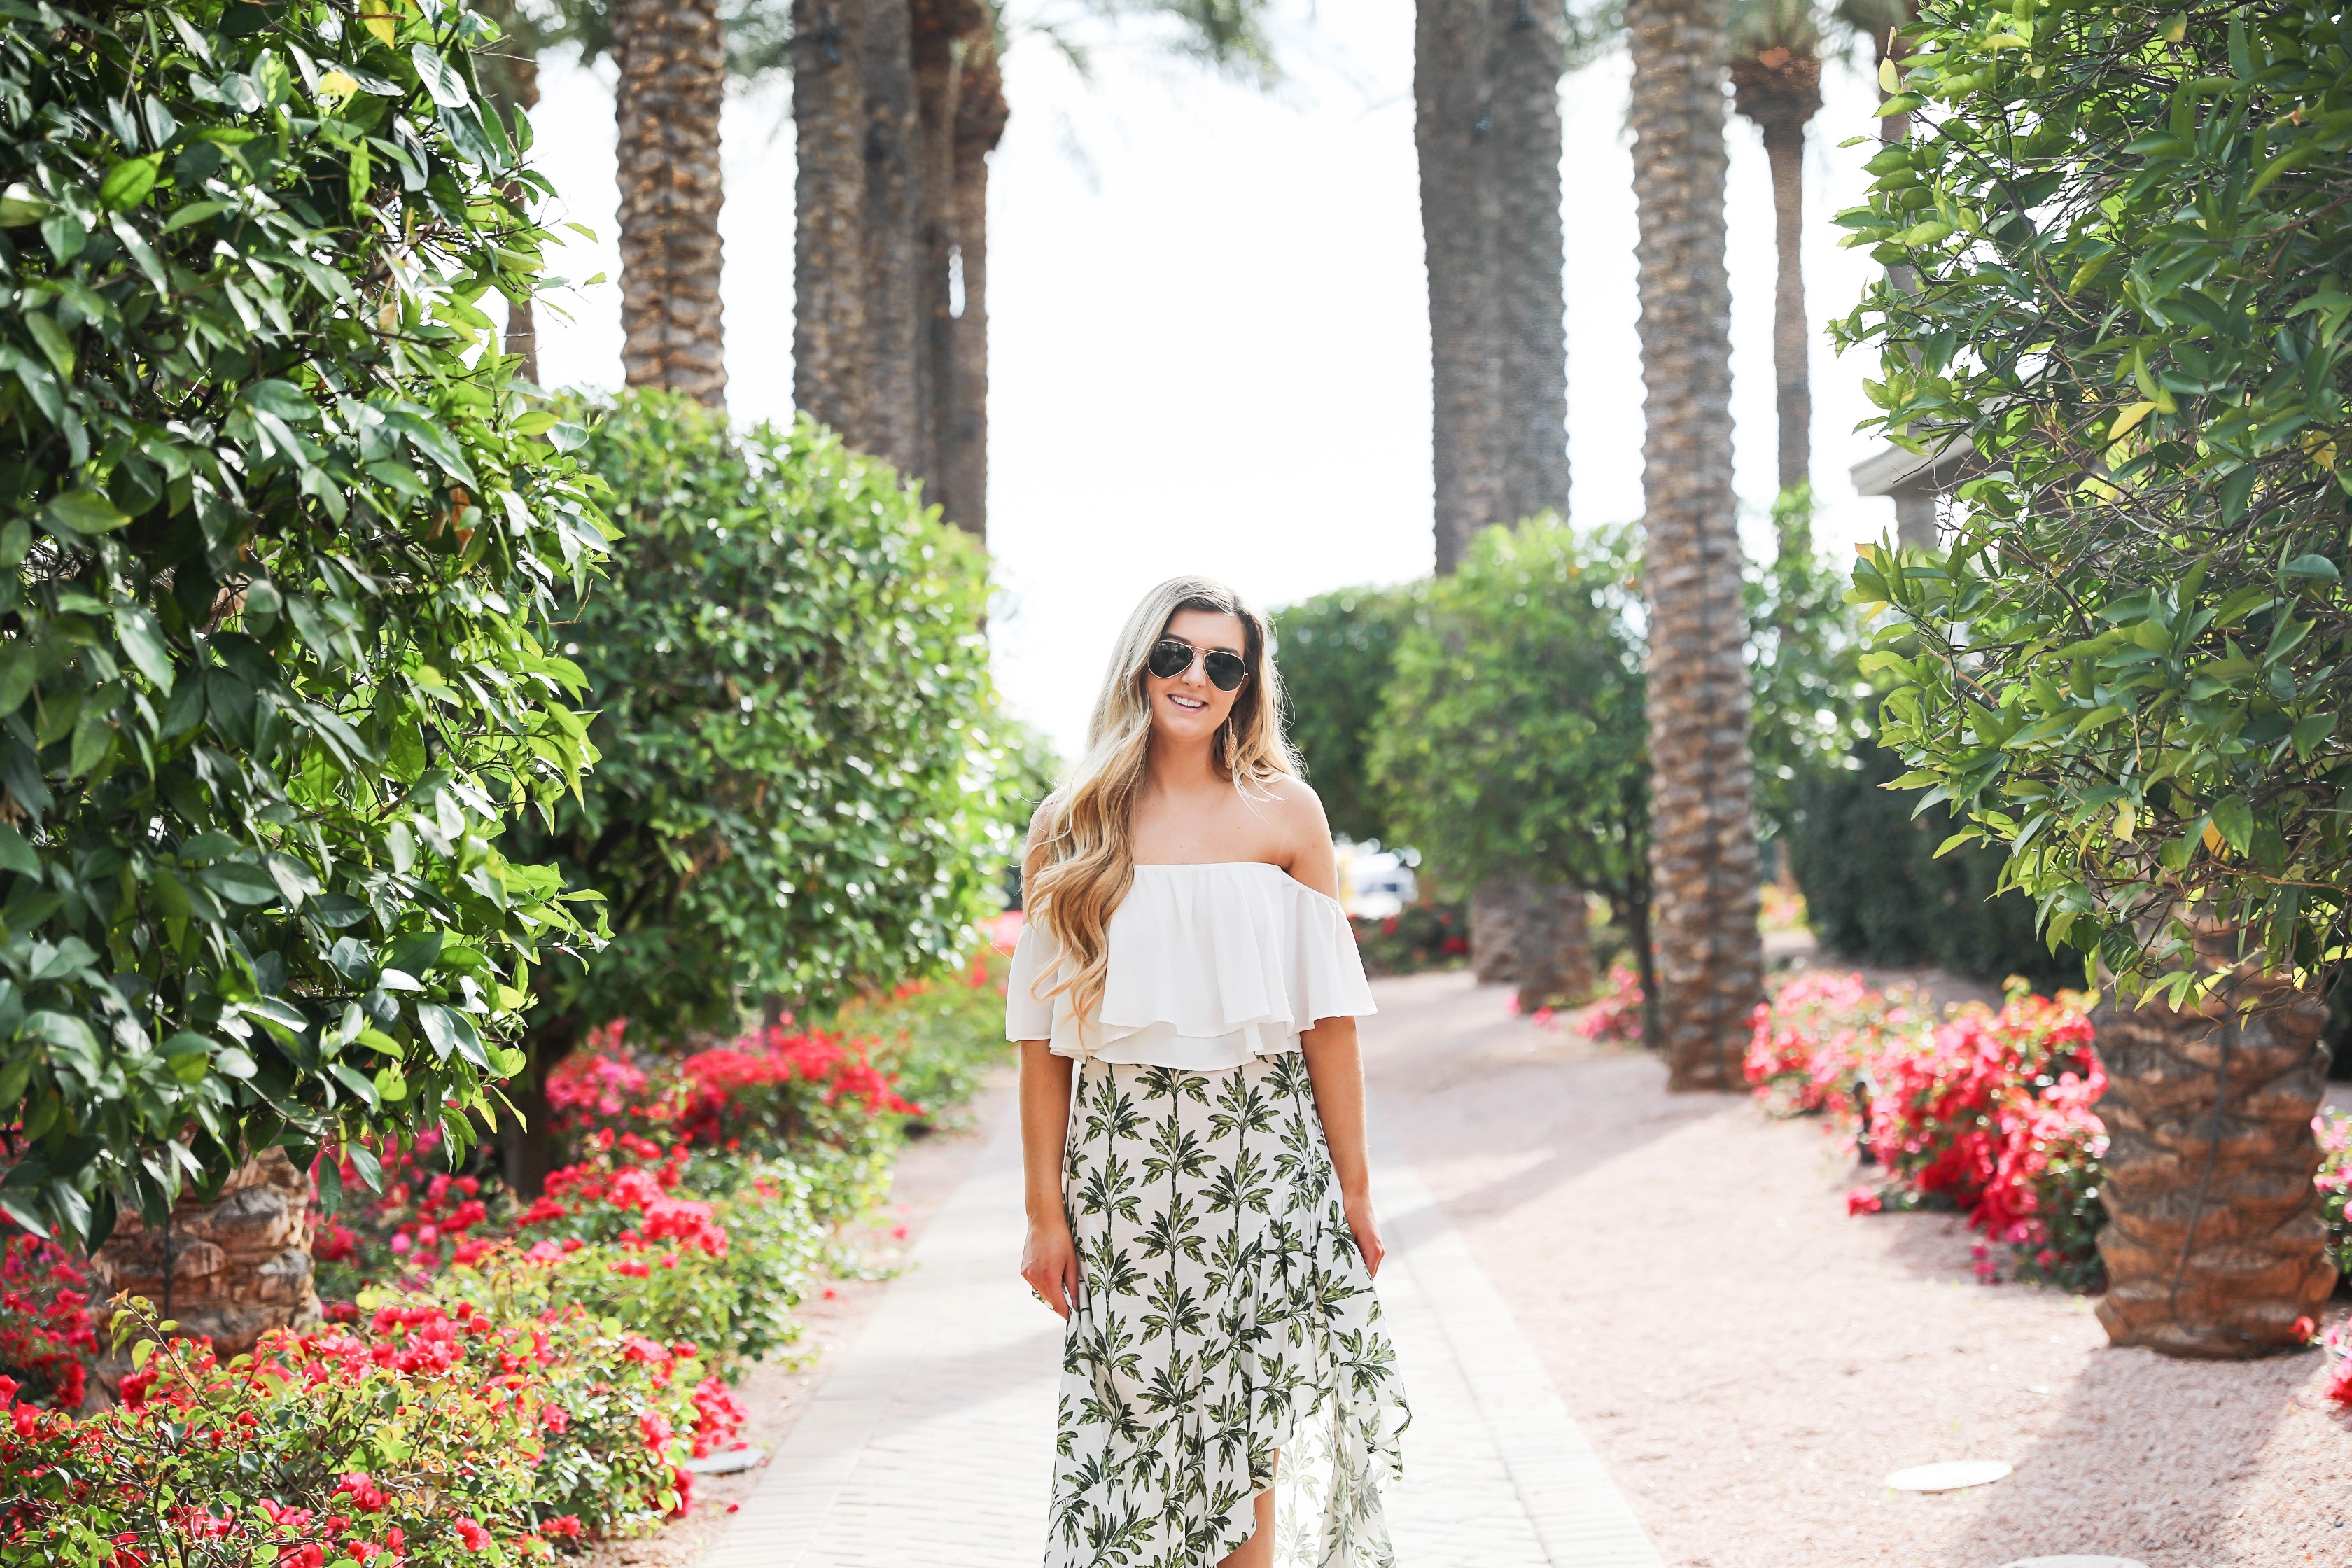 Show me your mumu palm maxi skirt and white flowy crop top! Such an adorable spring break outfit! Cute beach look for summer! Details on fashion blog daily dose of charm by lauren lindmark